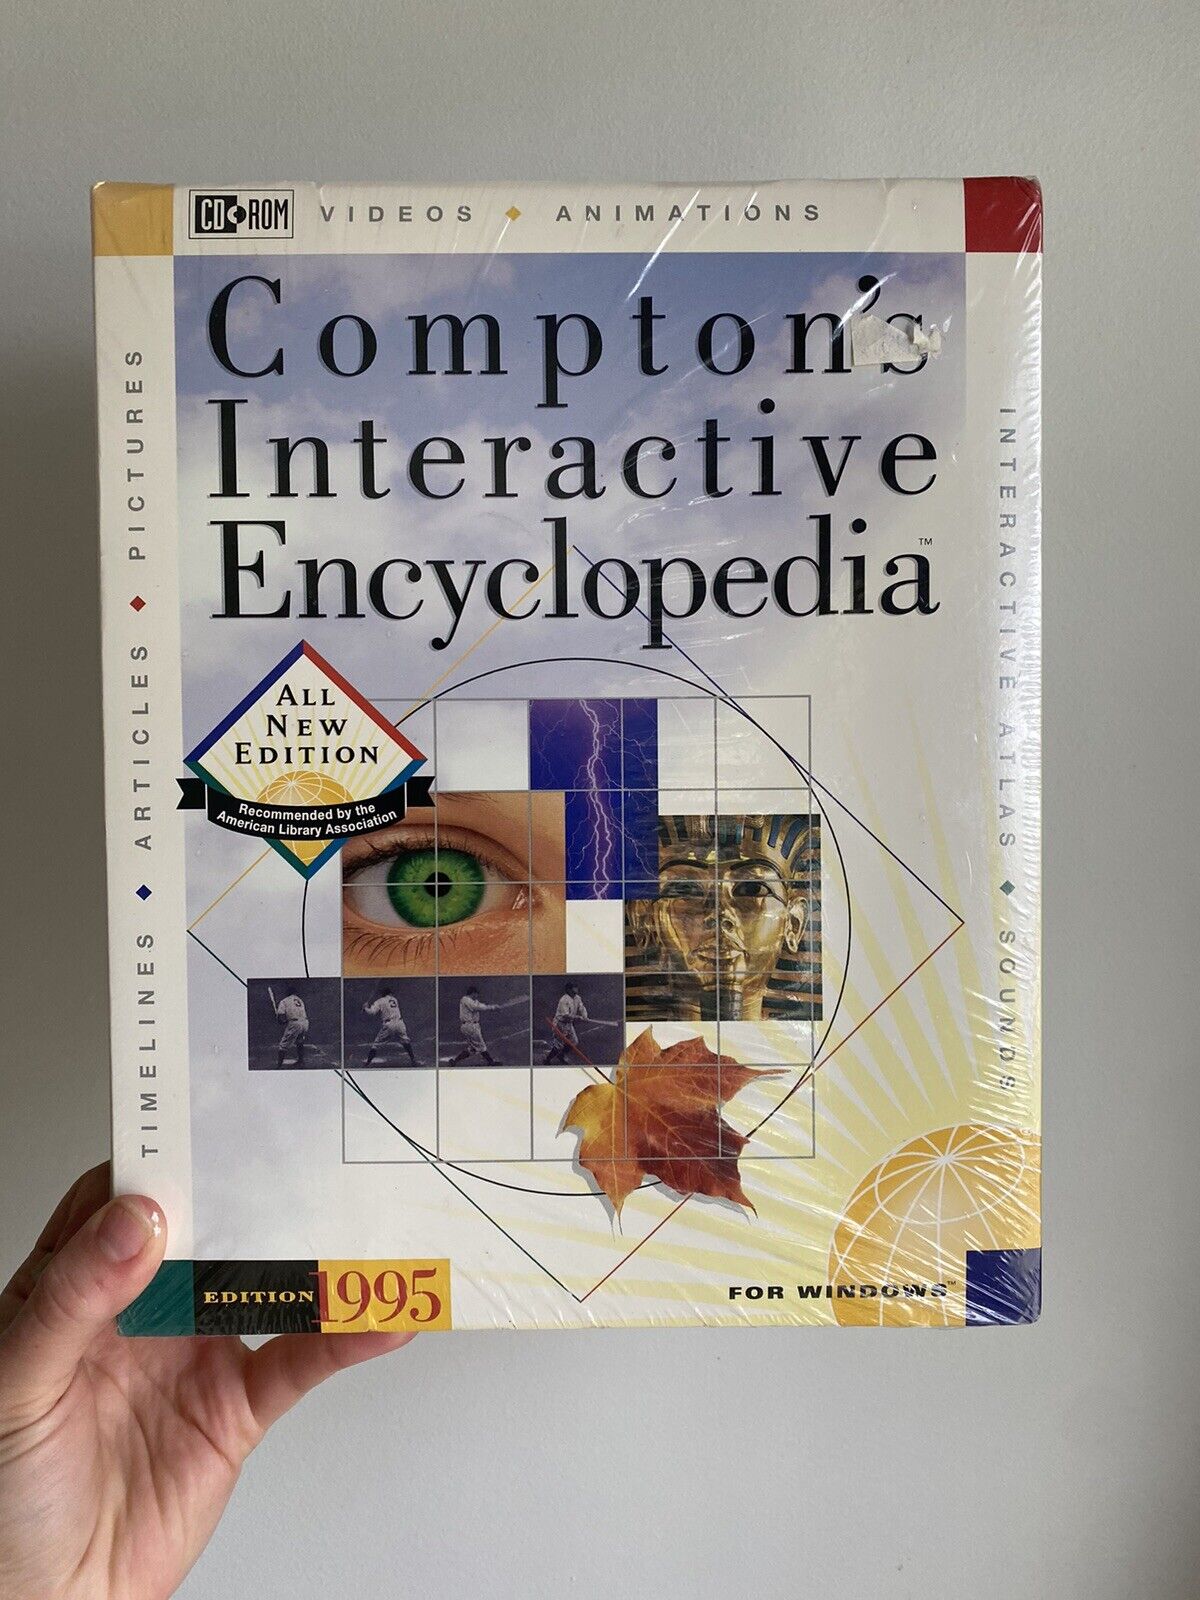 SEALED 1995 EDITION COMPTON'S INTERACTIVE ENCYCLOPEDIA FOR WINDOWS IN BOX